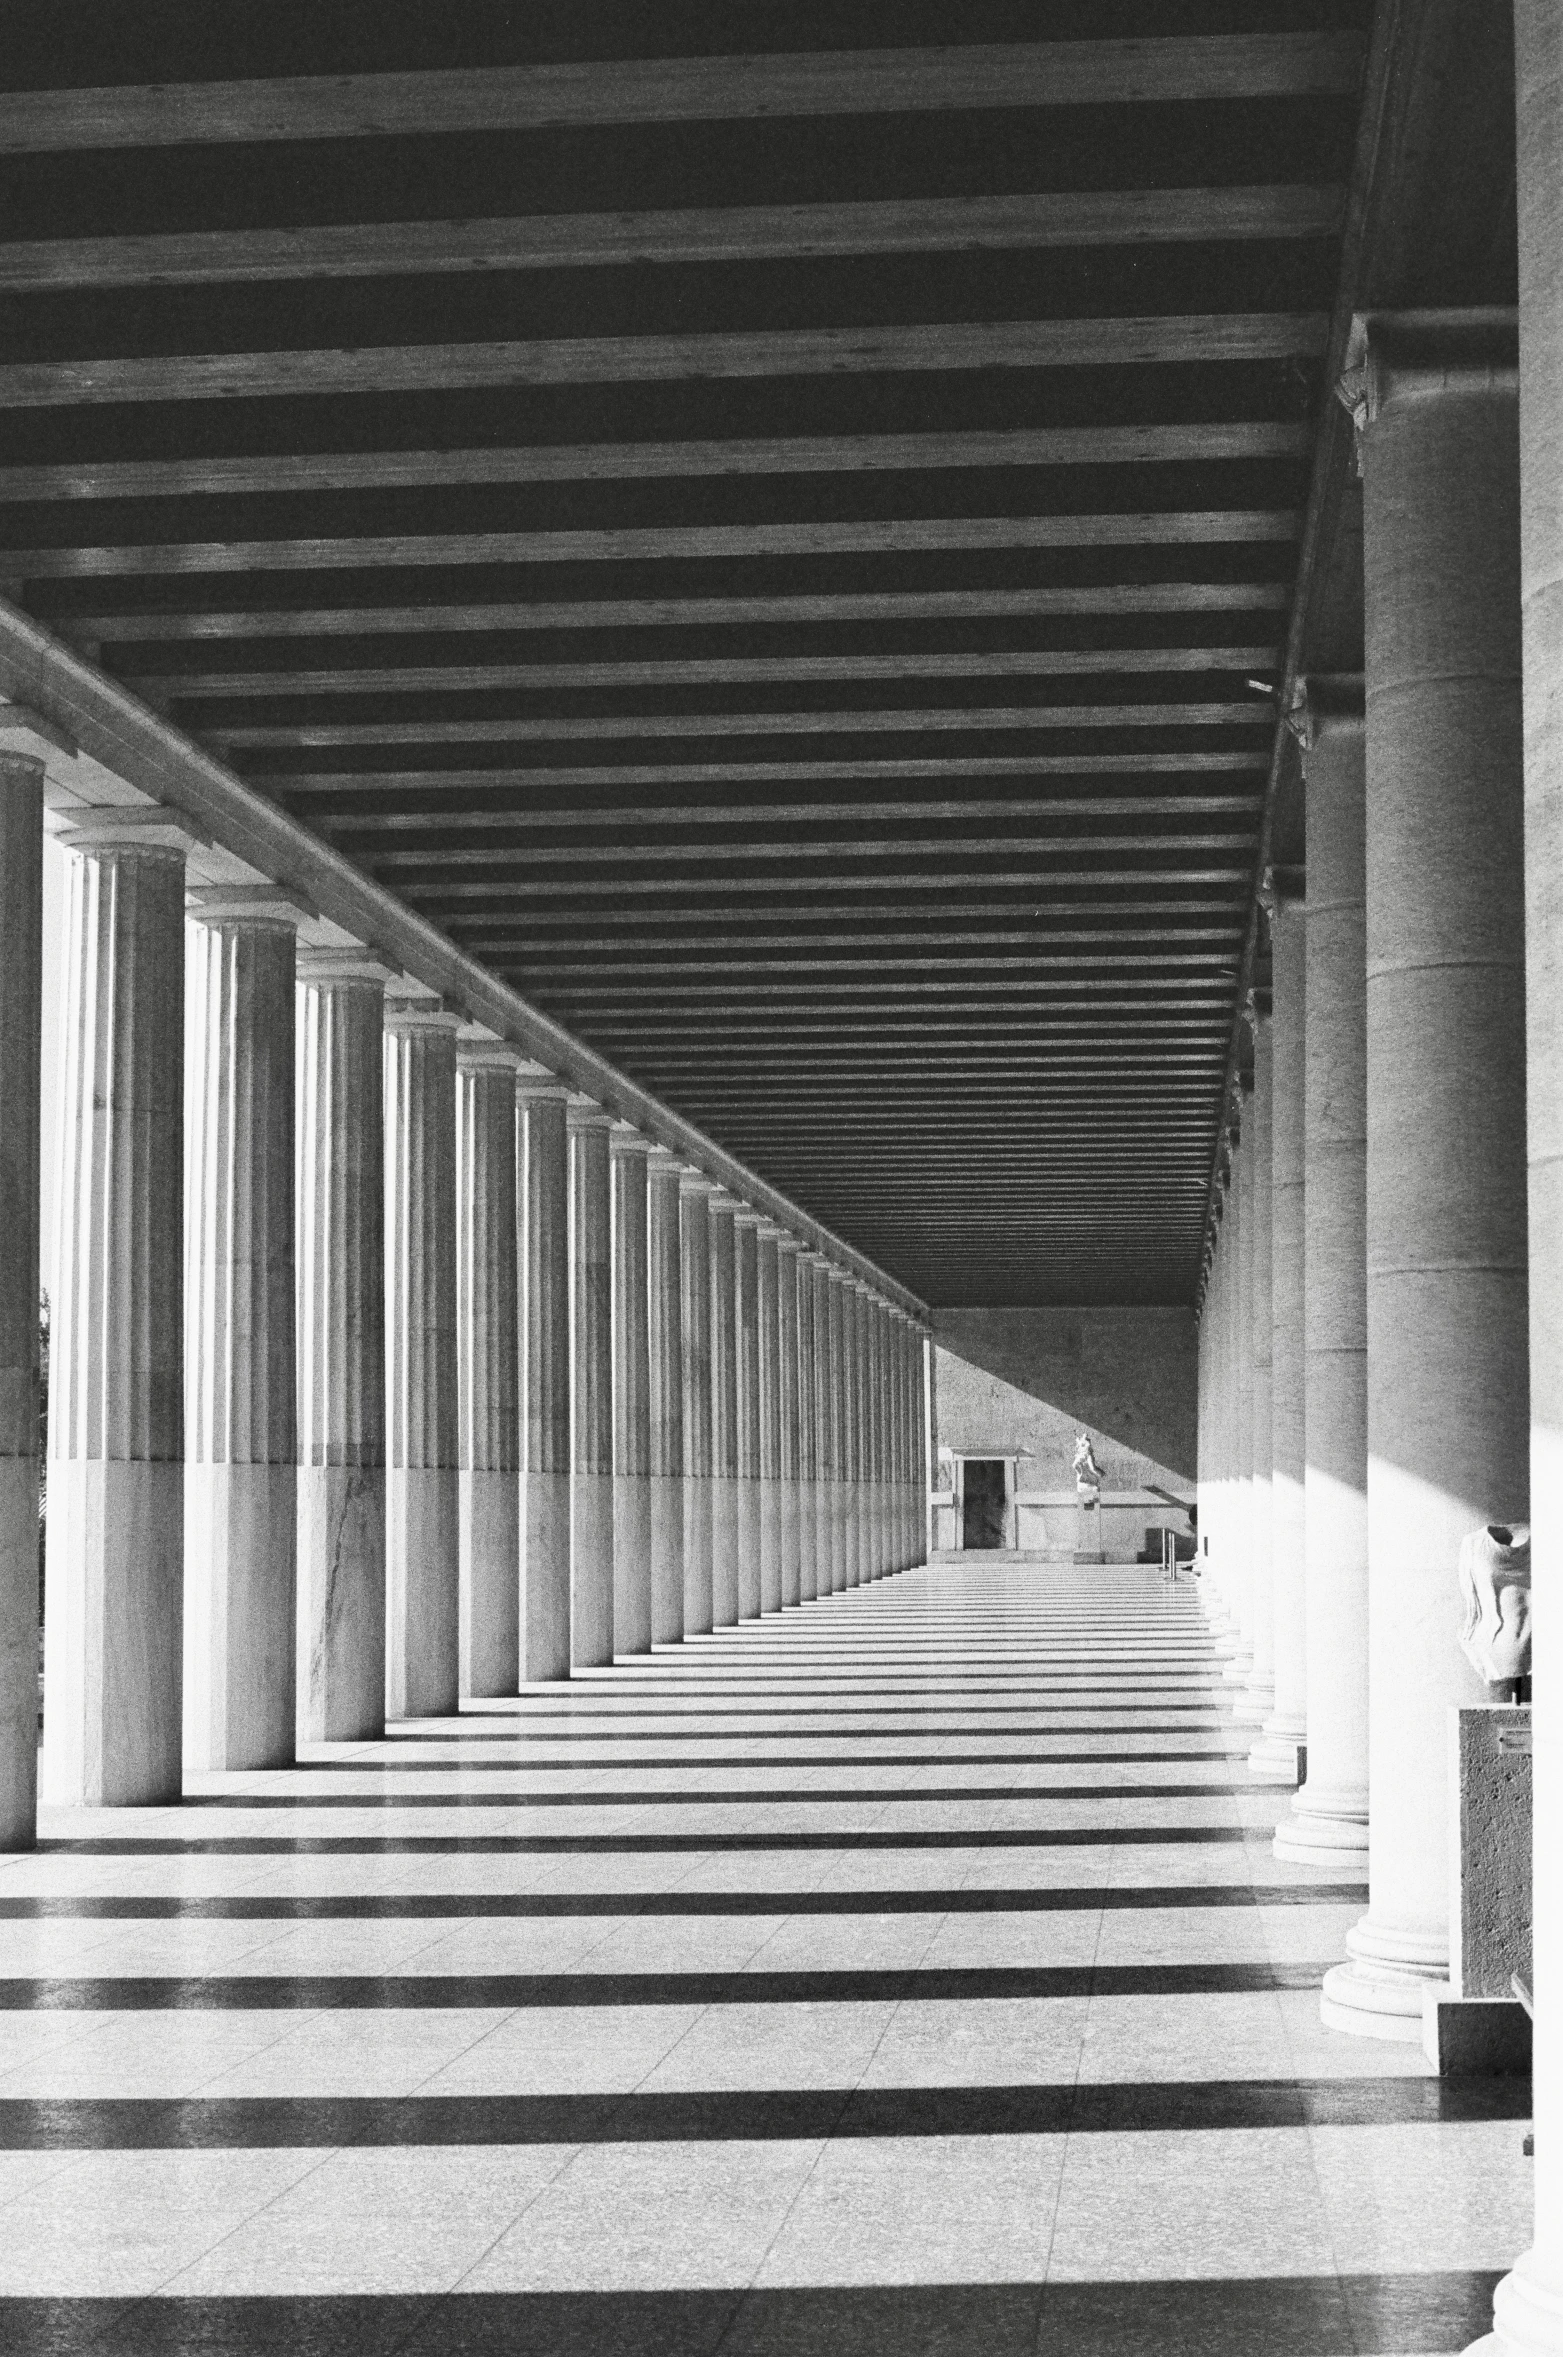 a long line of white columns with one person in the center